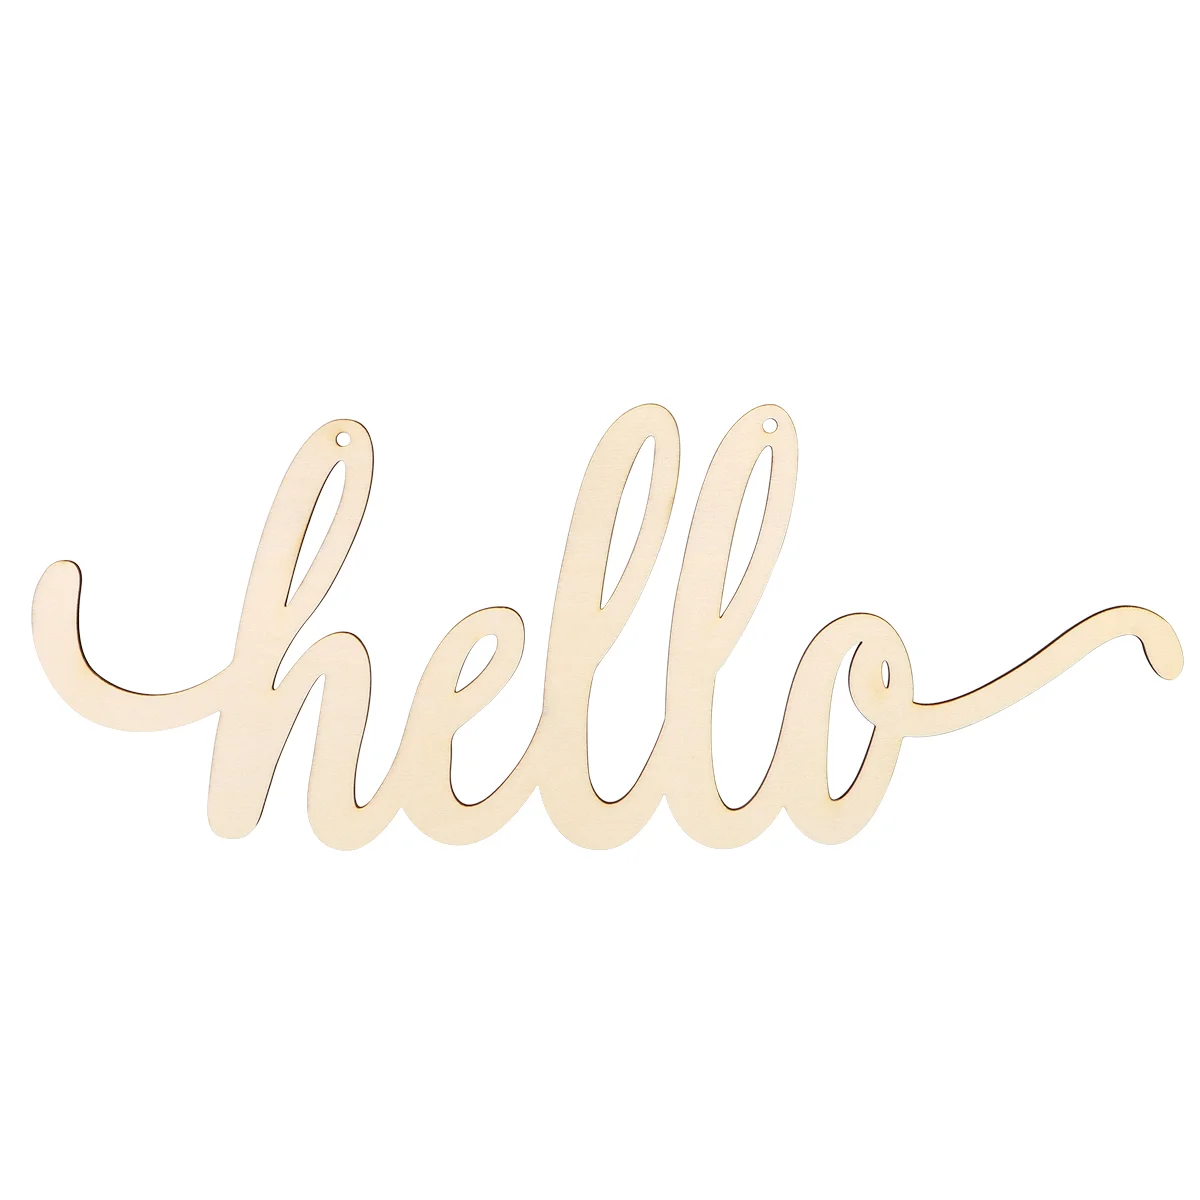 

Sign Wood Hello Decor Wooden Welcome Letters Wall Home Wreath Plaque Crafts Words Signs Door Cursive Front Cutout Hanging Diy